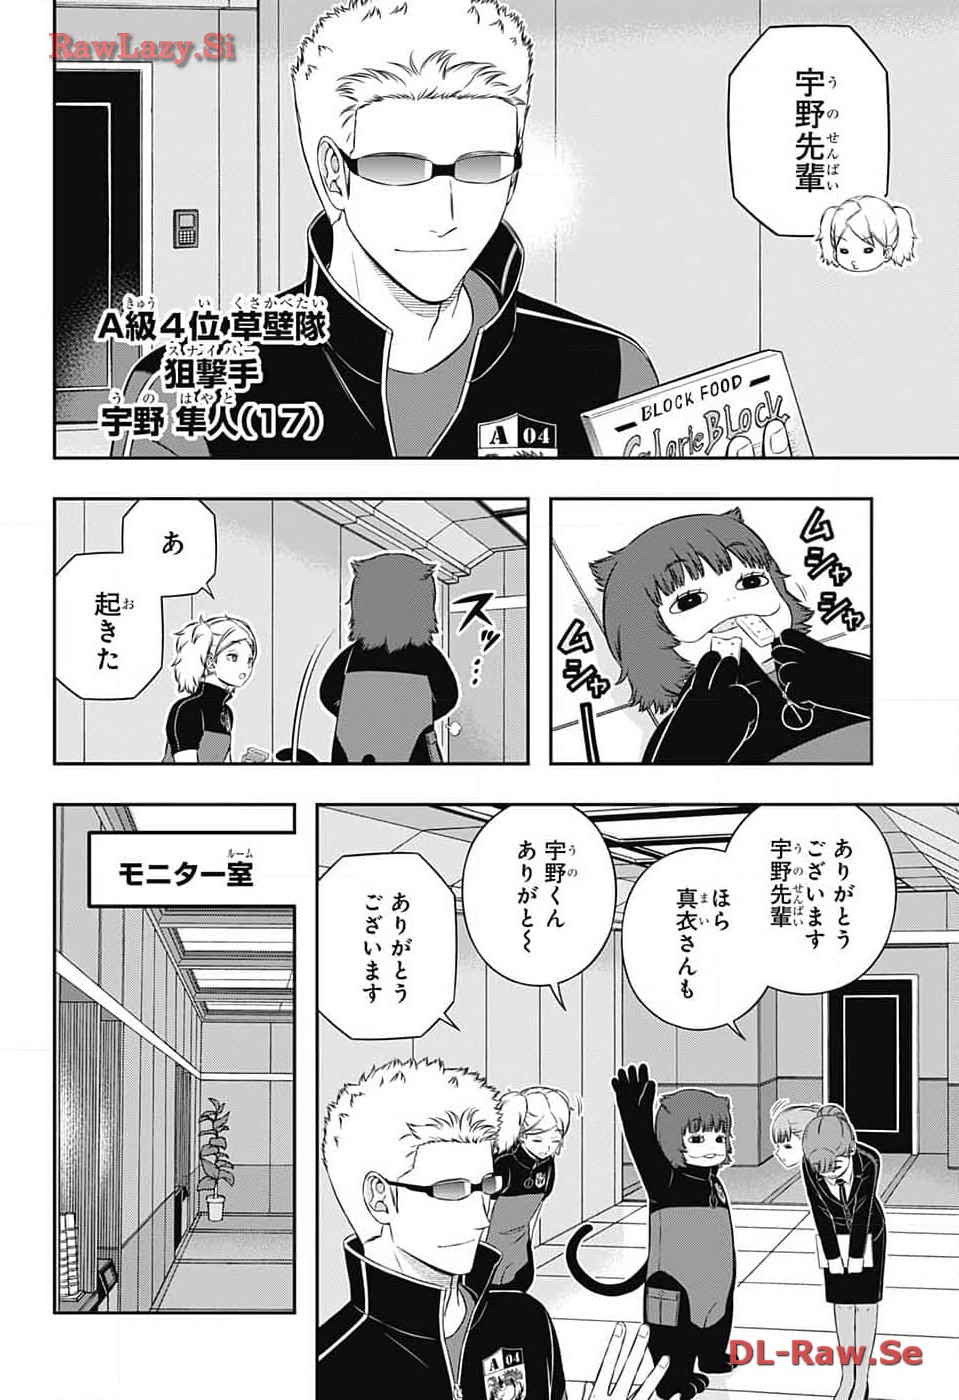 World Trigger - Chapter 240 - Page 2